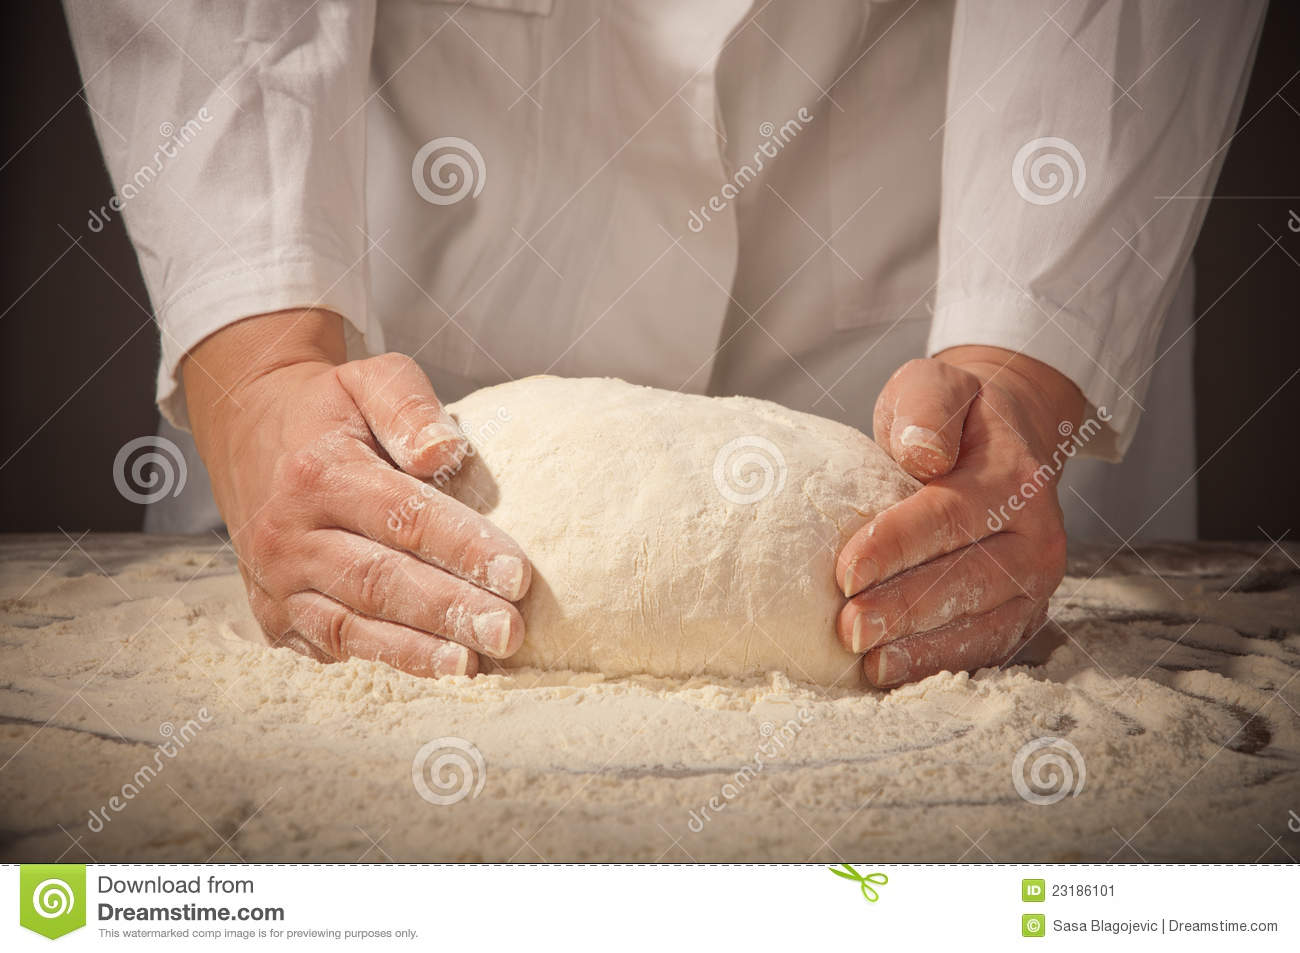 Hands Kneading Bread Dough Stock Image   Image  23186101